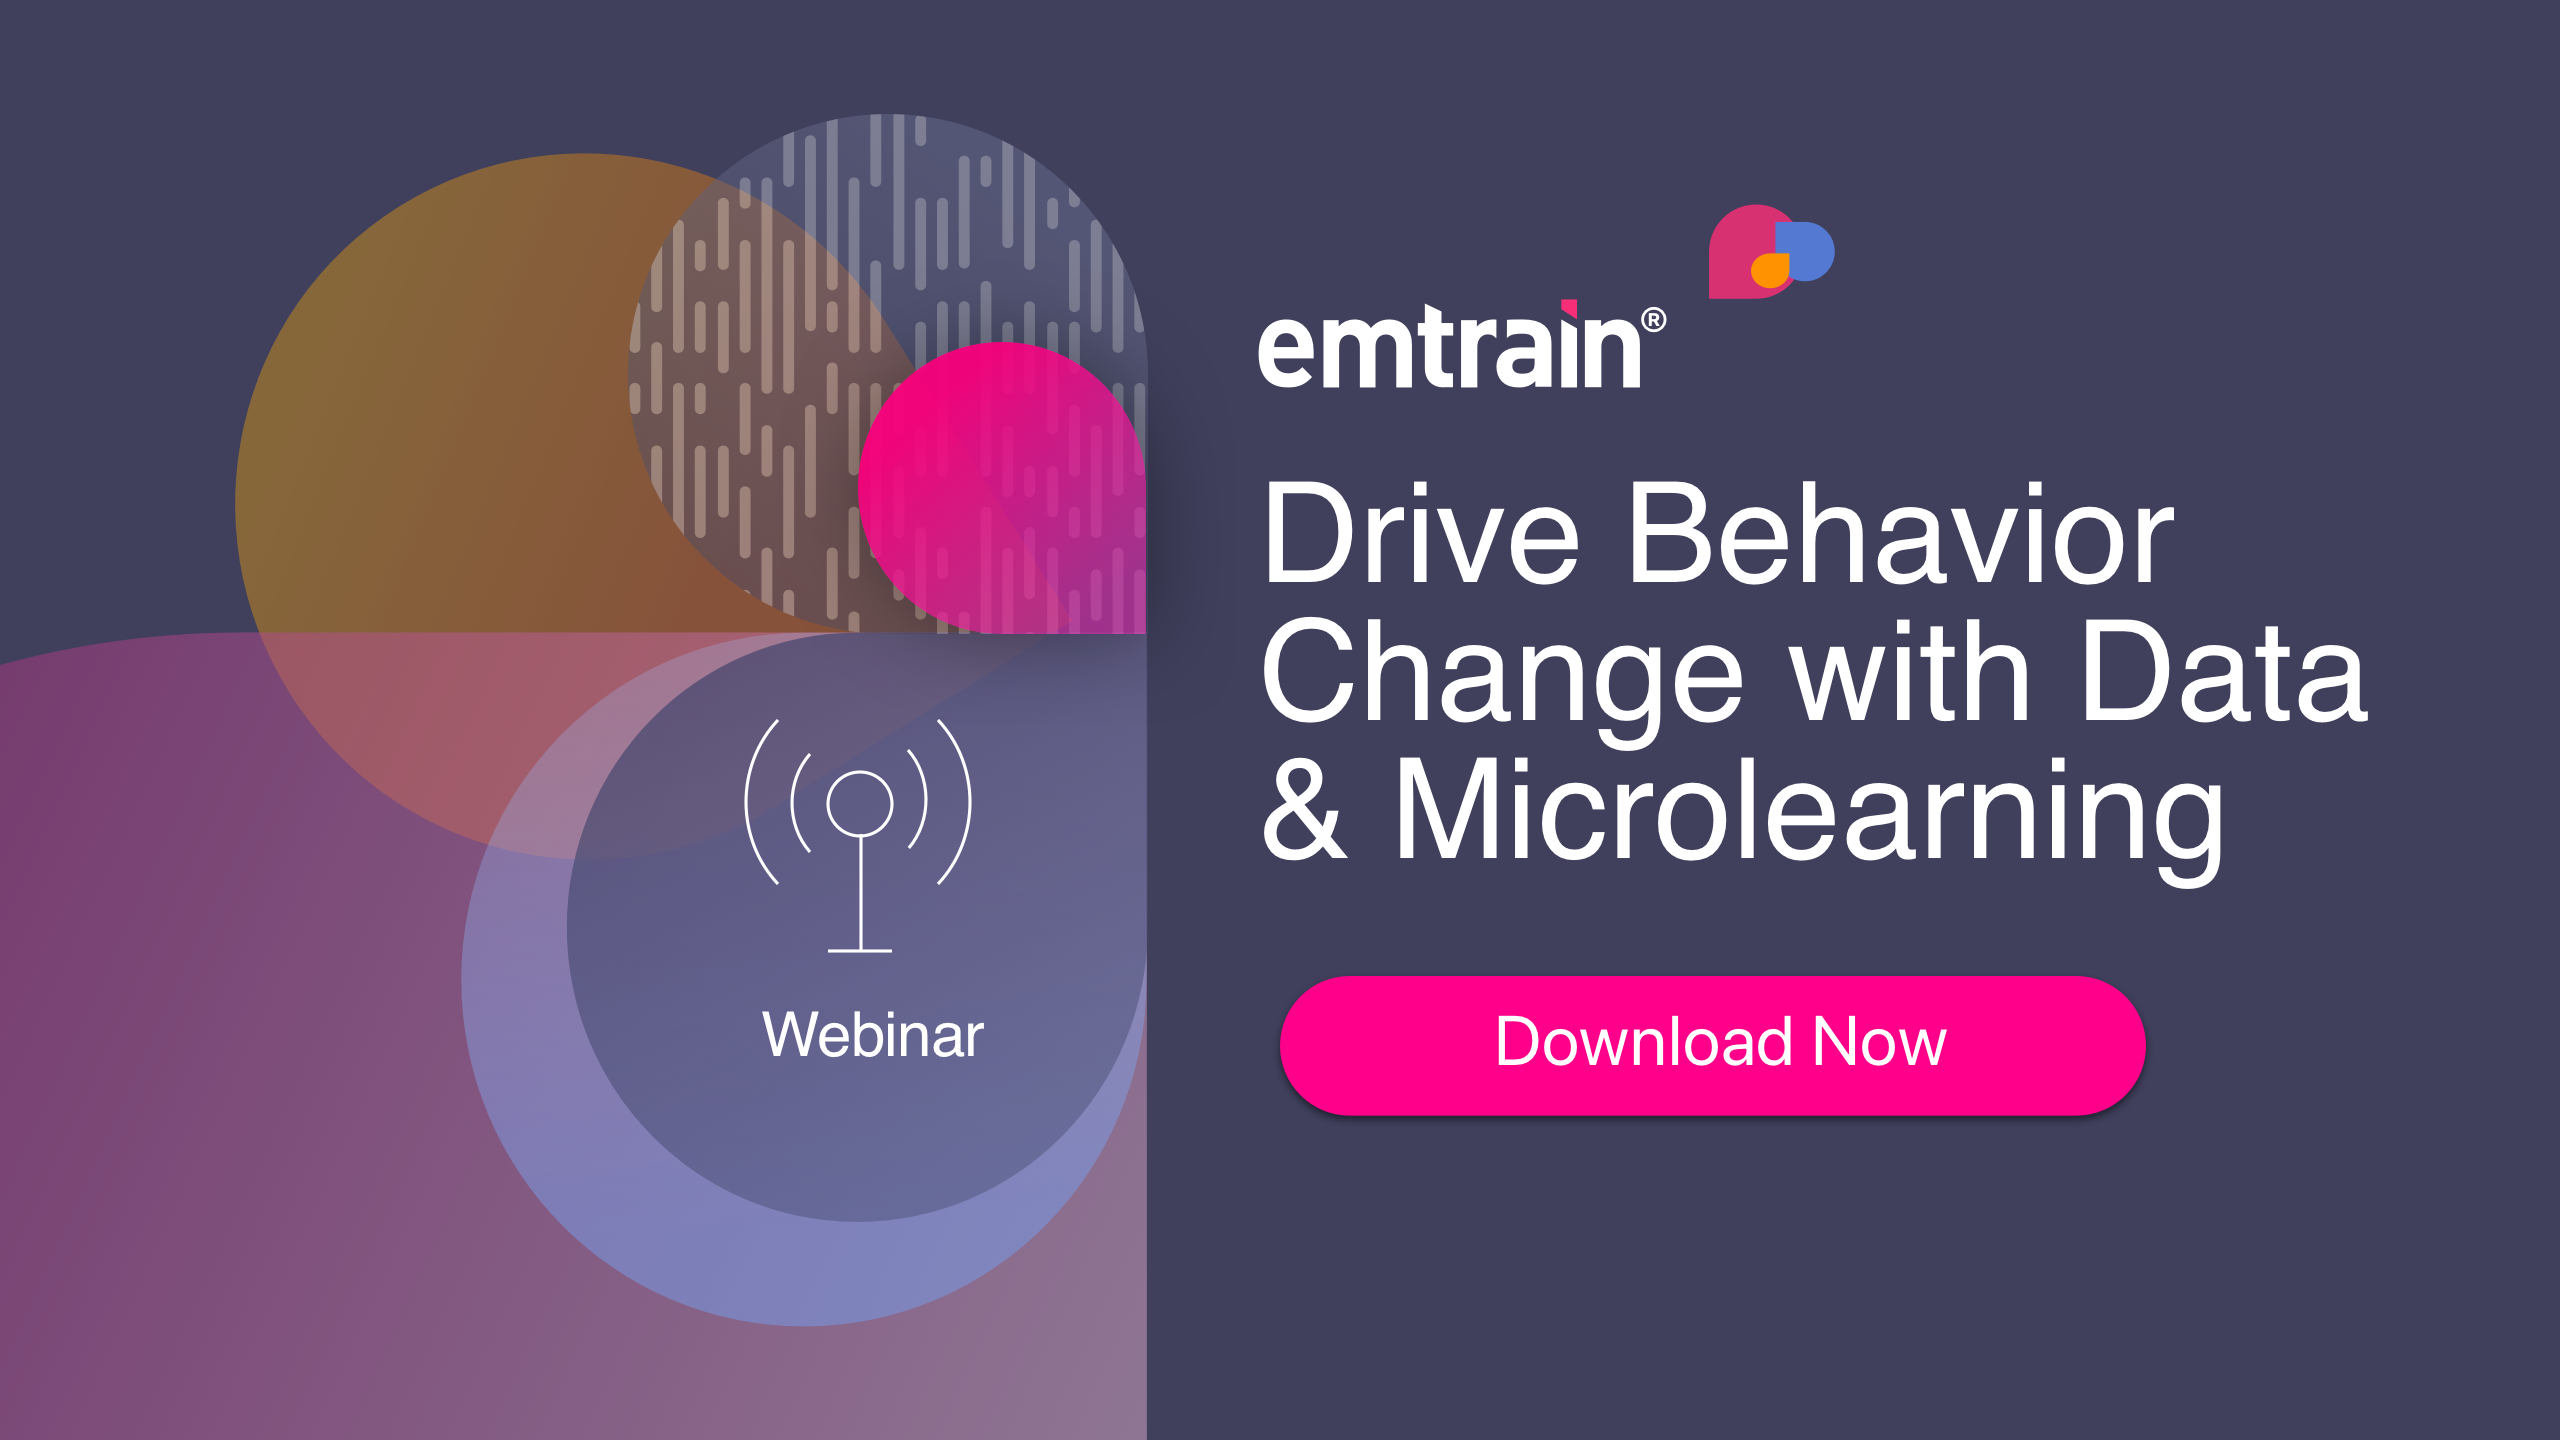 Drive Behavior Change with Data & Microlearning